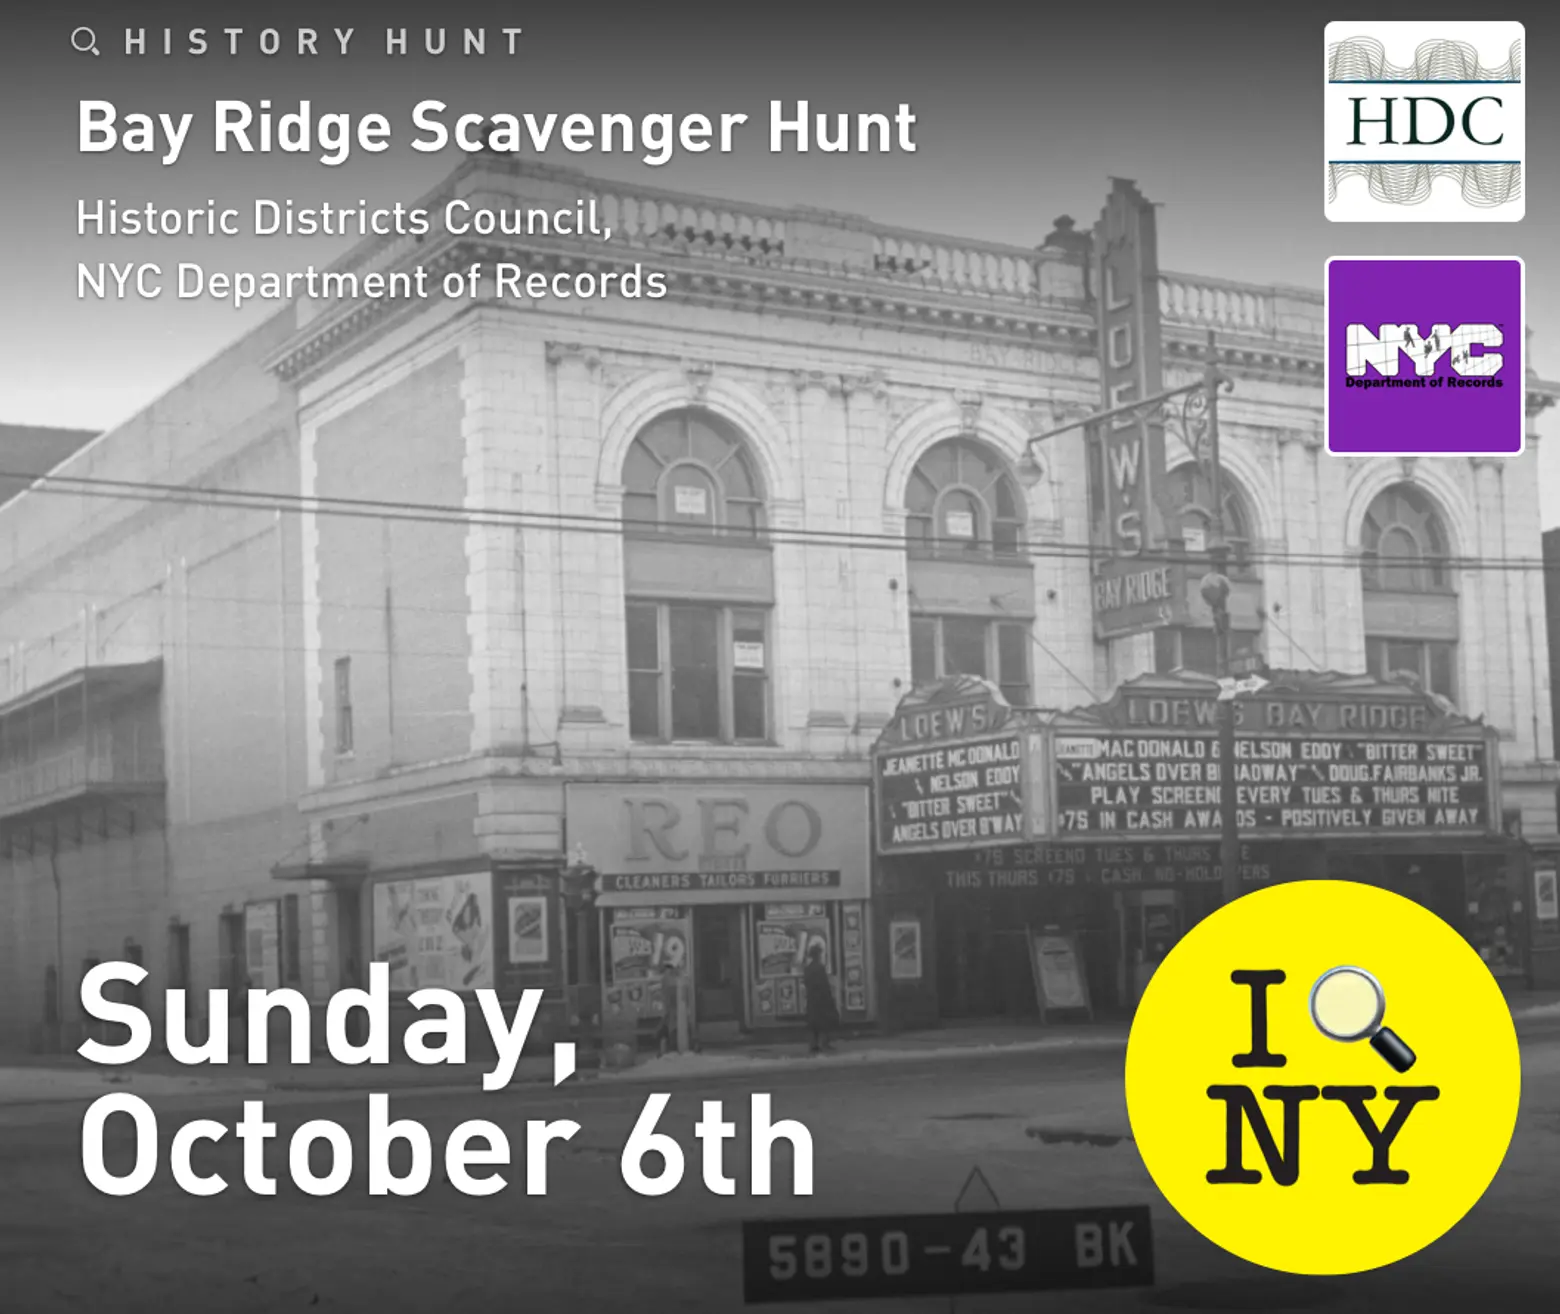 Get to know Bay Ridge in the Urban Archive scavenger hunt